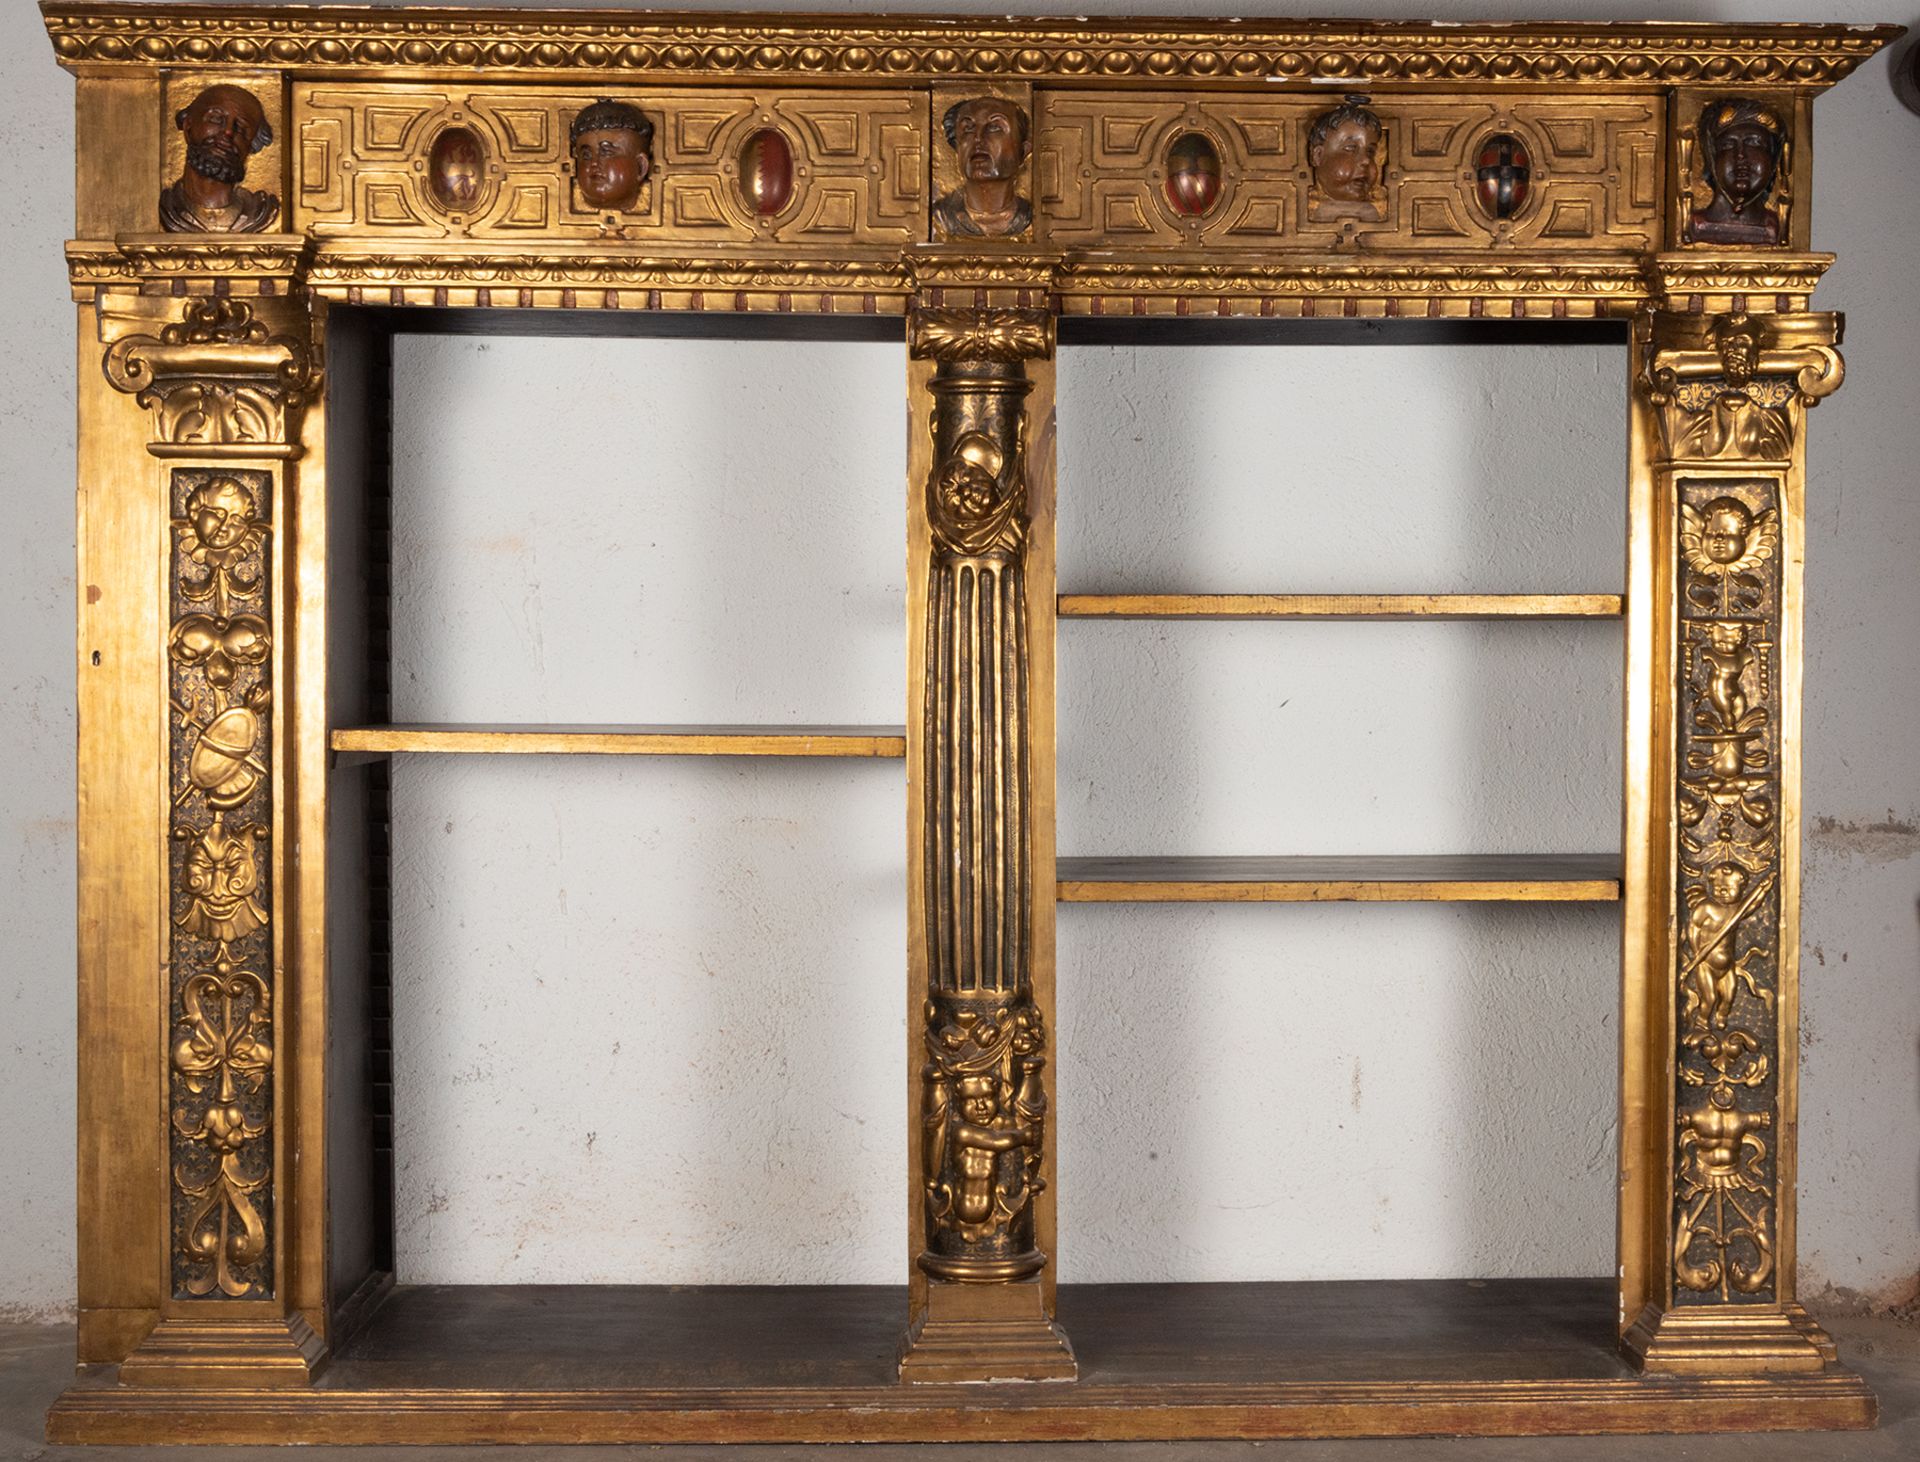 Large Bookcase Furniture made up of a Renaissance Altarpiece with shelves, 16th century, the shelves